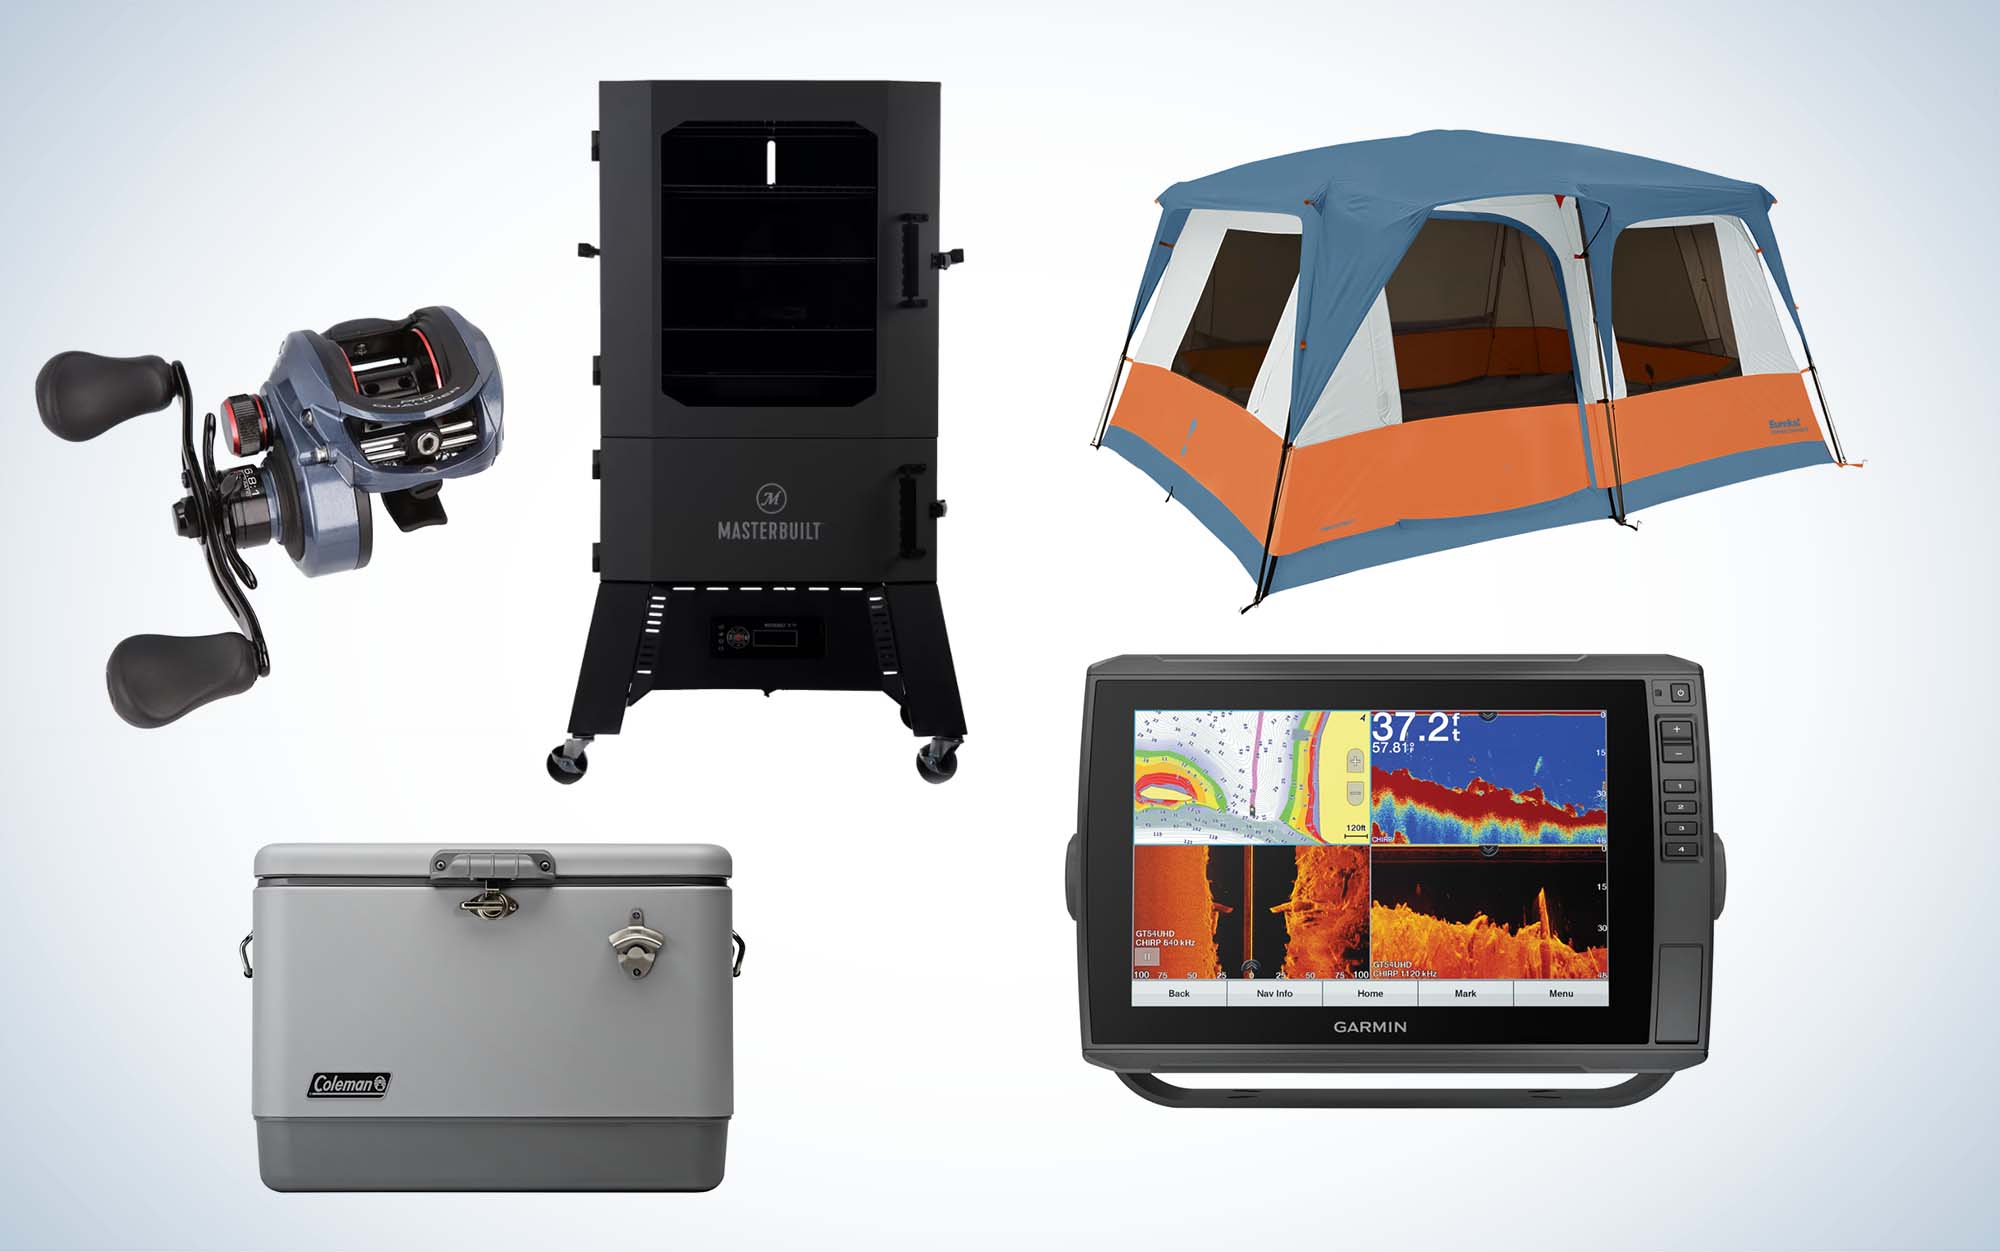 Cabela's Memorial Day Sale: Deals on Fish Finders, Tents, Grills, Yeti  Coolers, and More